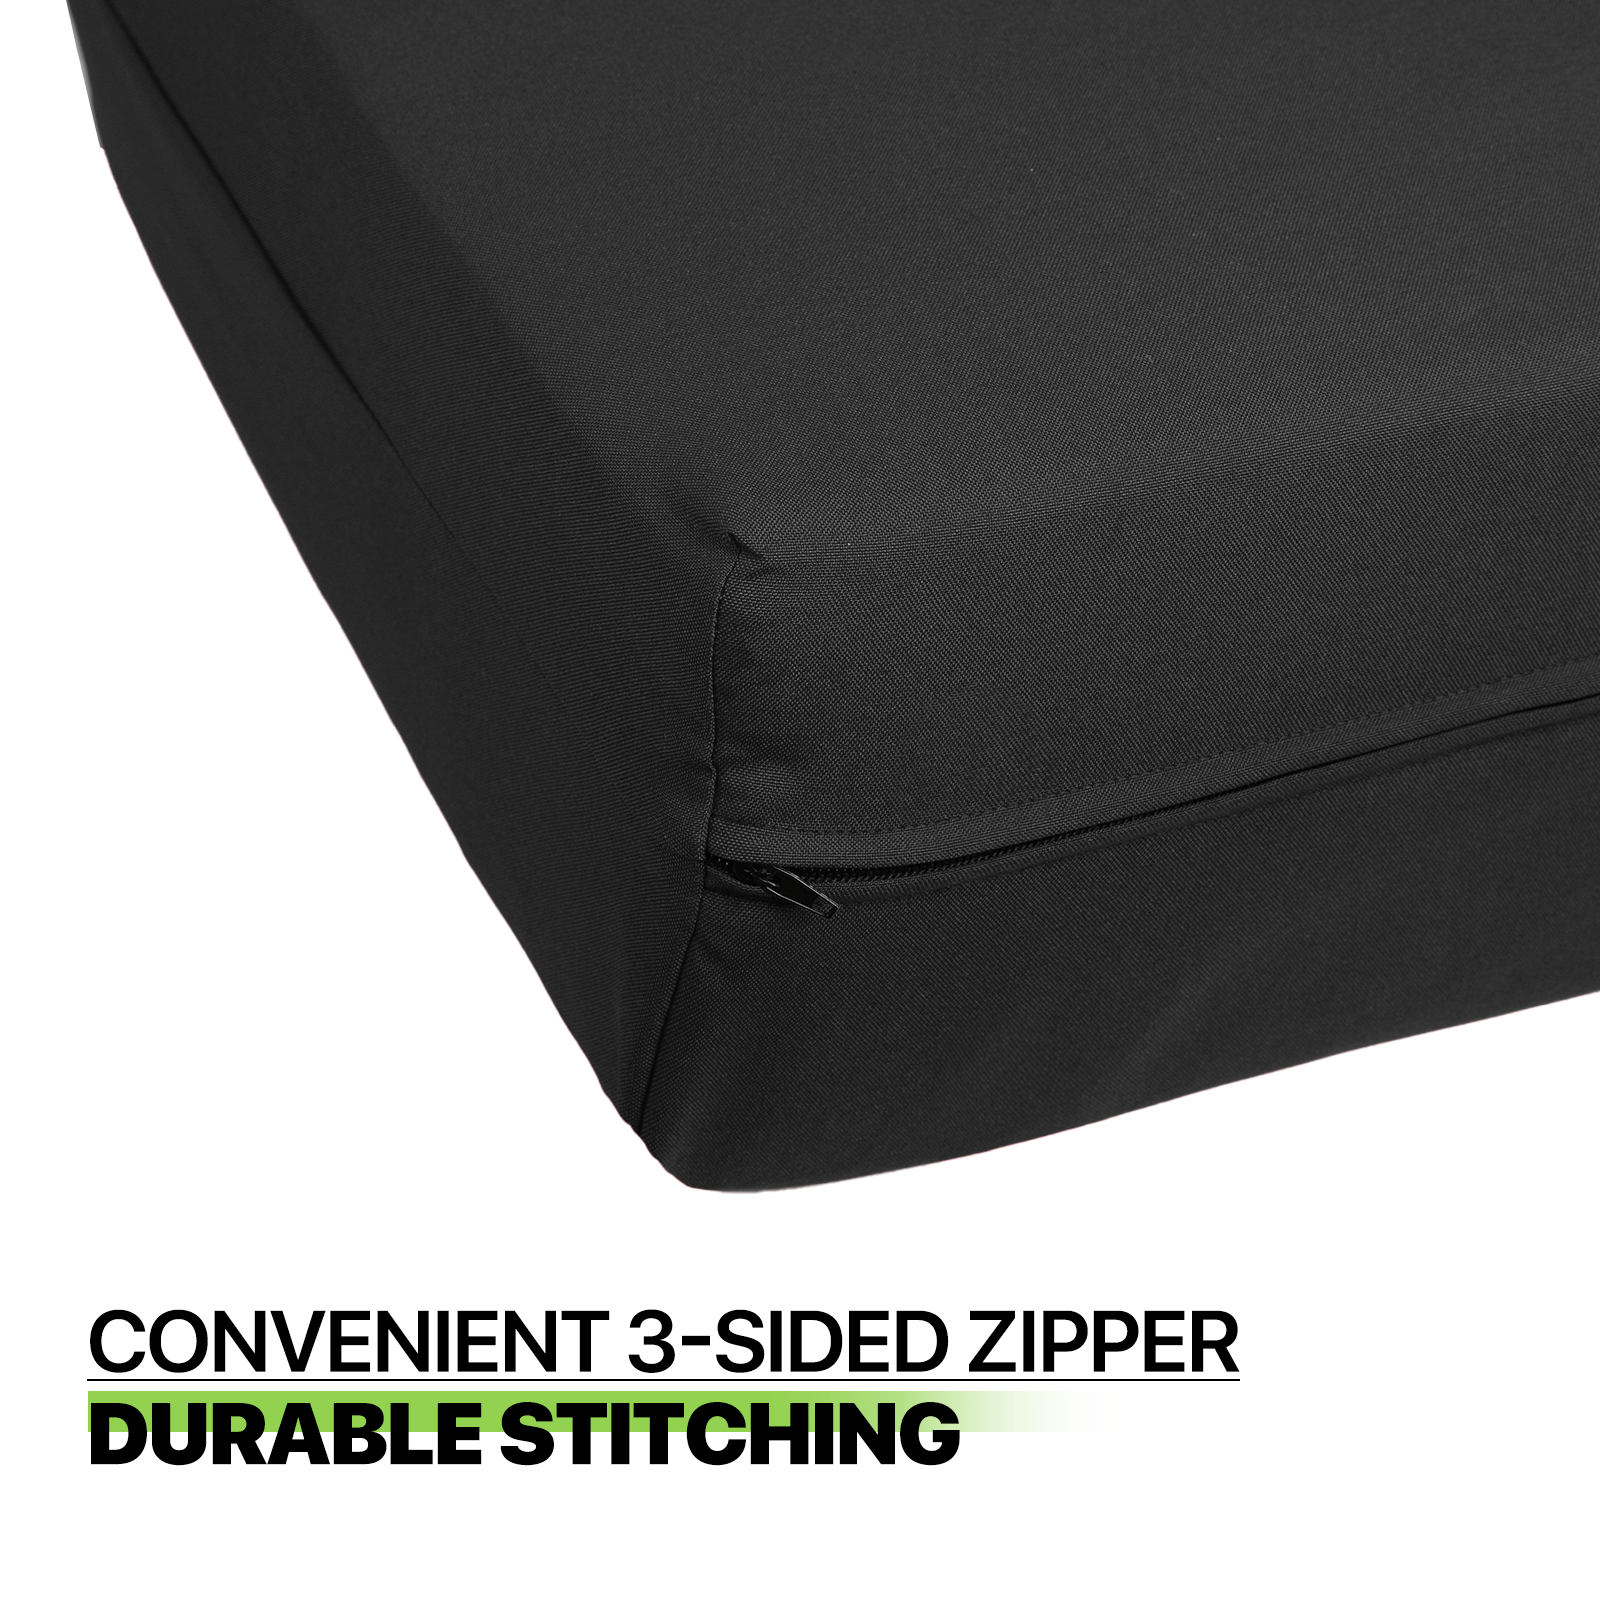 Full Size Solid Futon Cover Mattresses Sofa Loveseat Slipcover, 54x75 inch Black - image 2 of 9